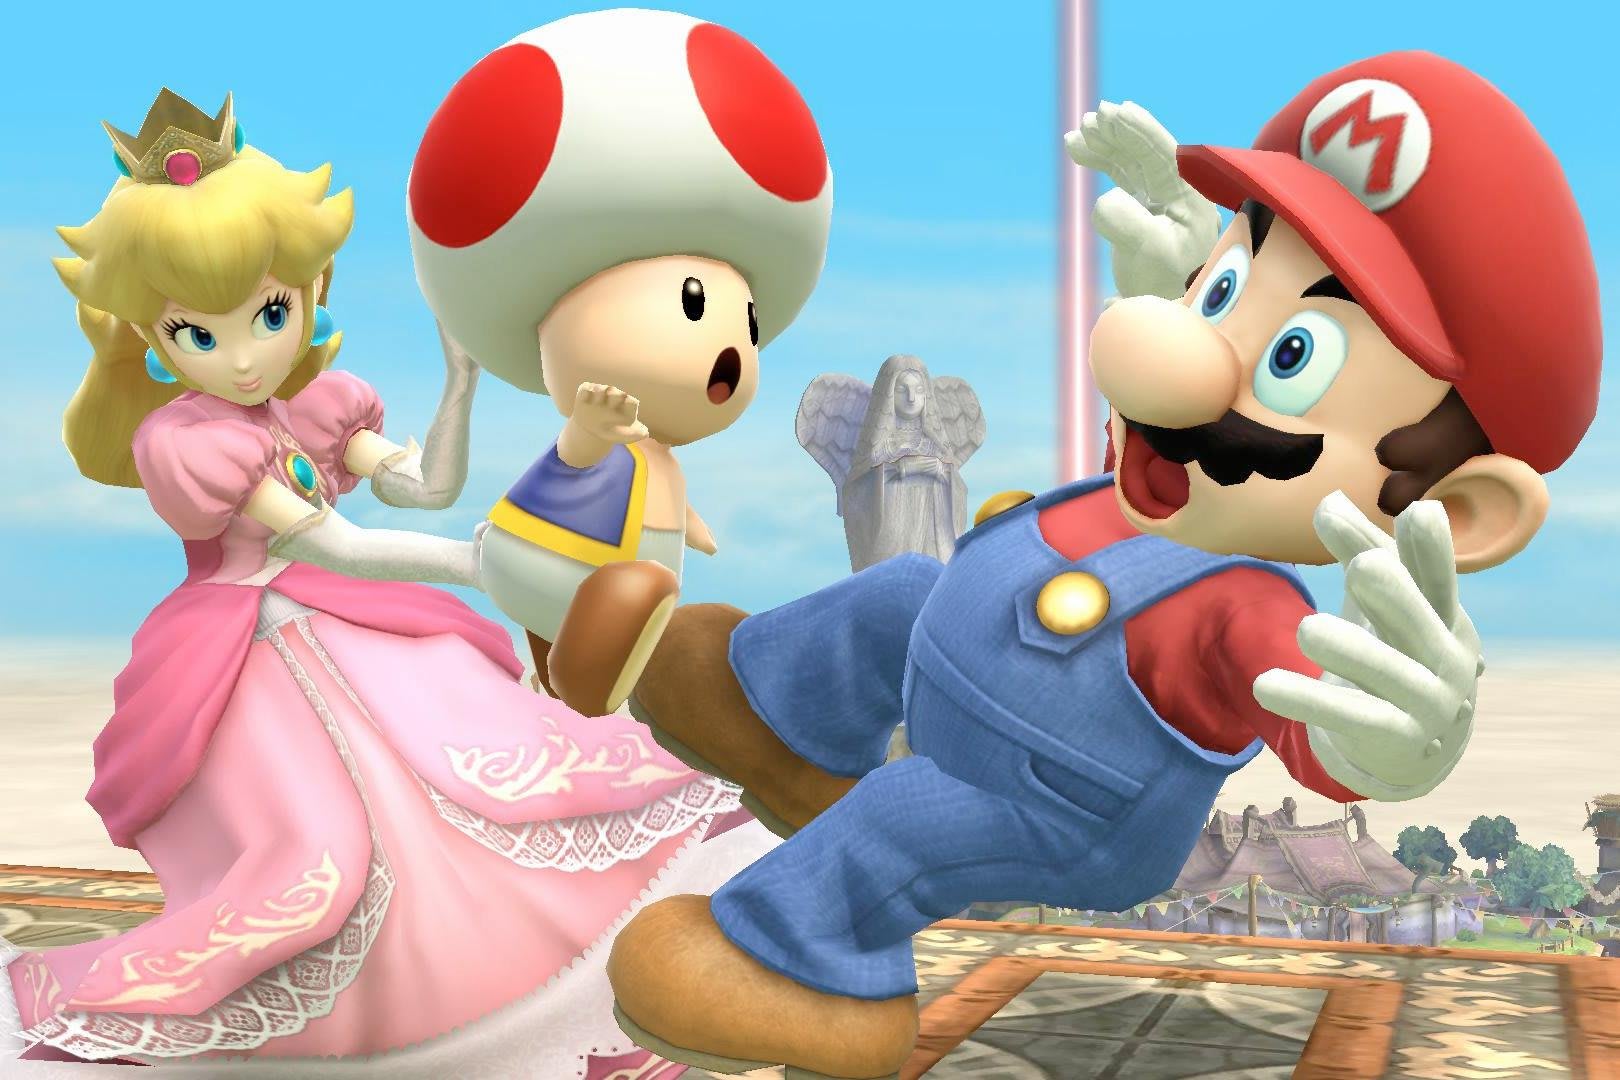 15 Things You Didn't Know About Princess Peach